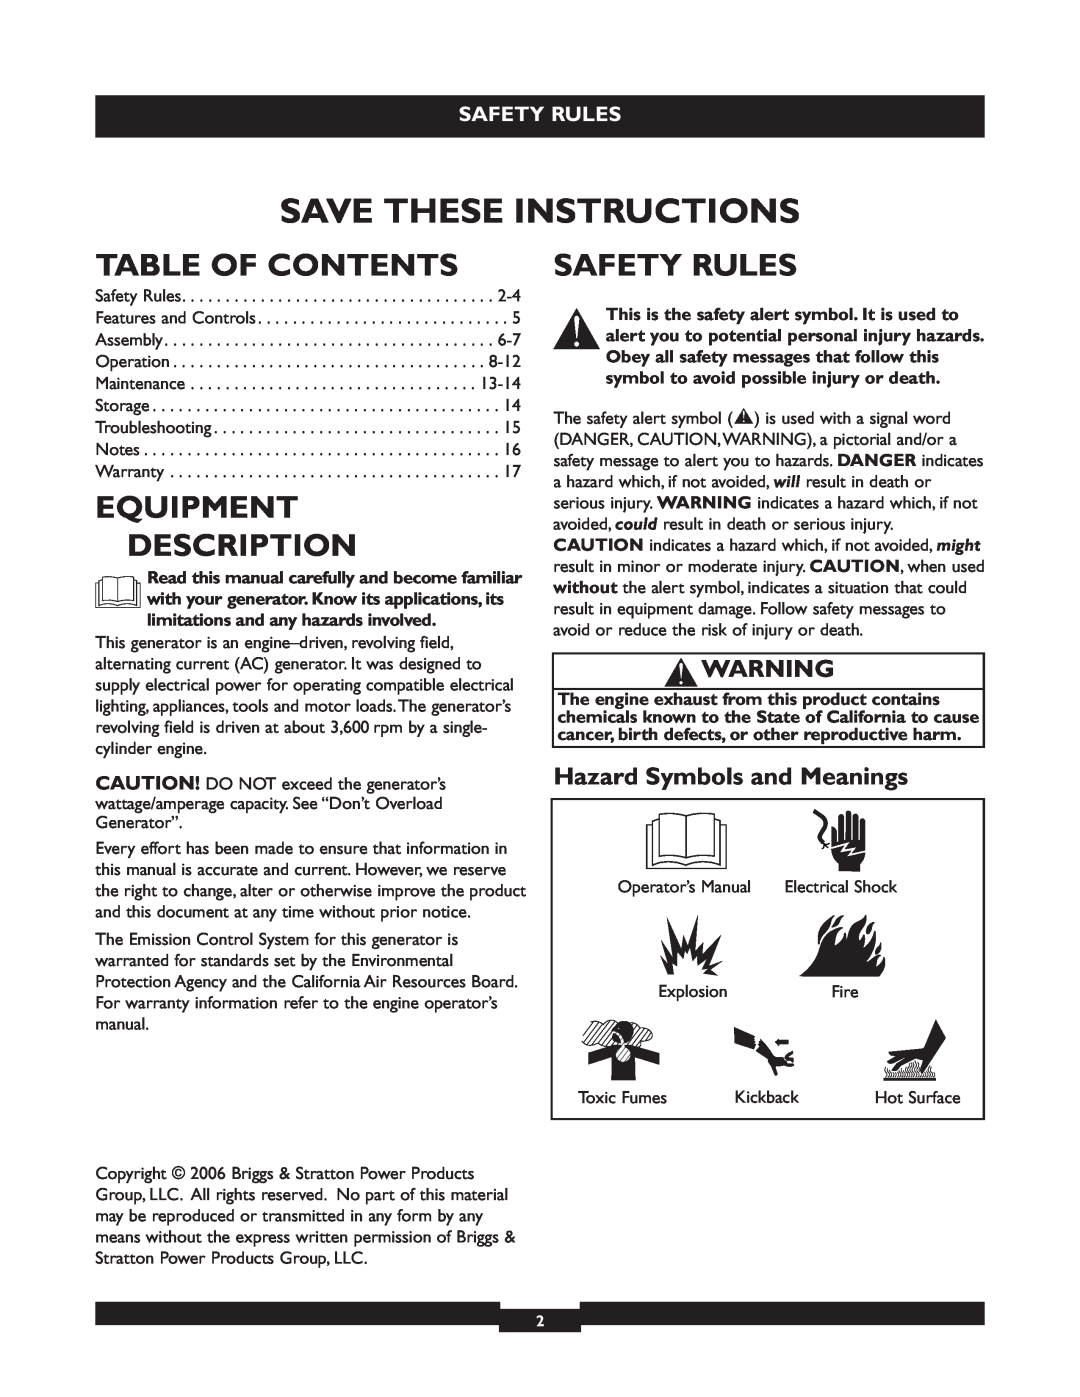 Briggs & Stratton 30205 manual Table Of Contents, Equipment Description, Safety Rules, Hazard Symbols and Meanings 